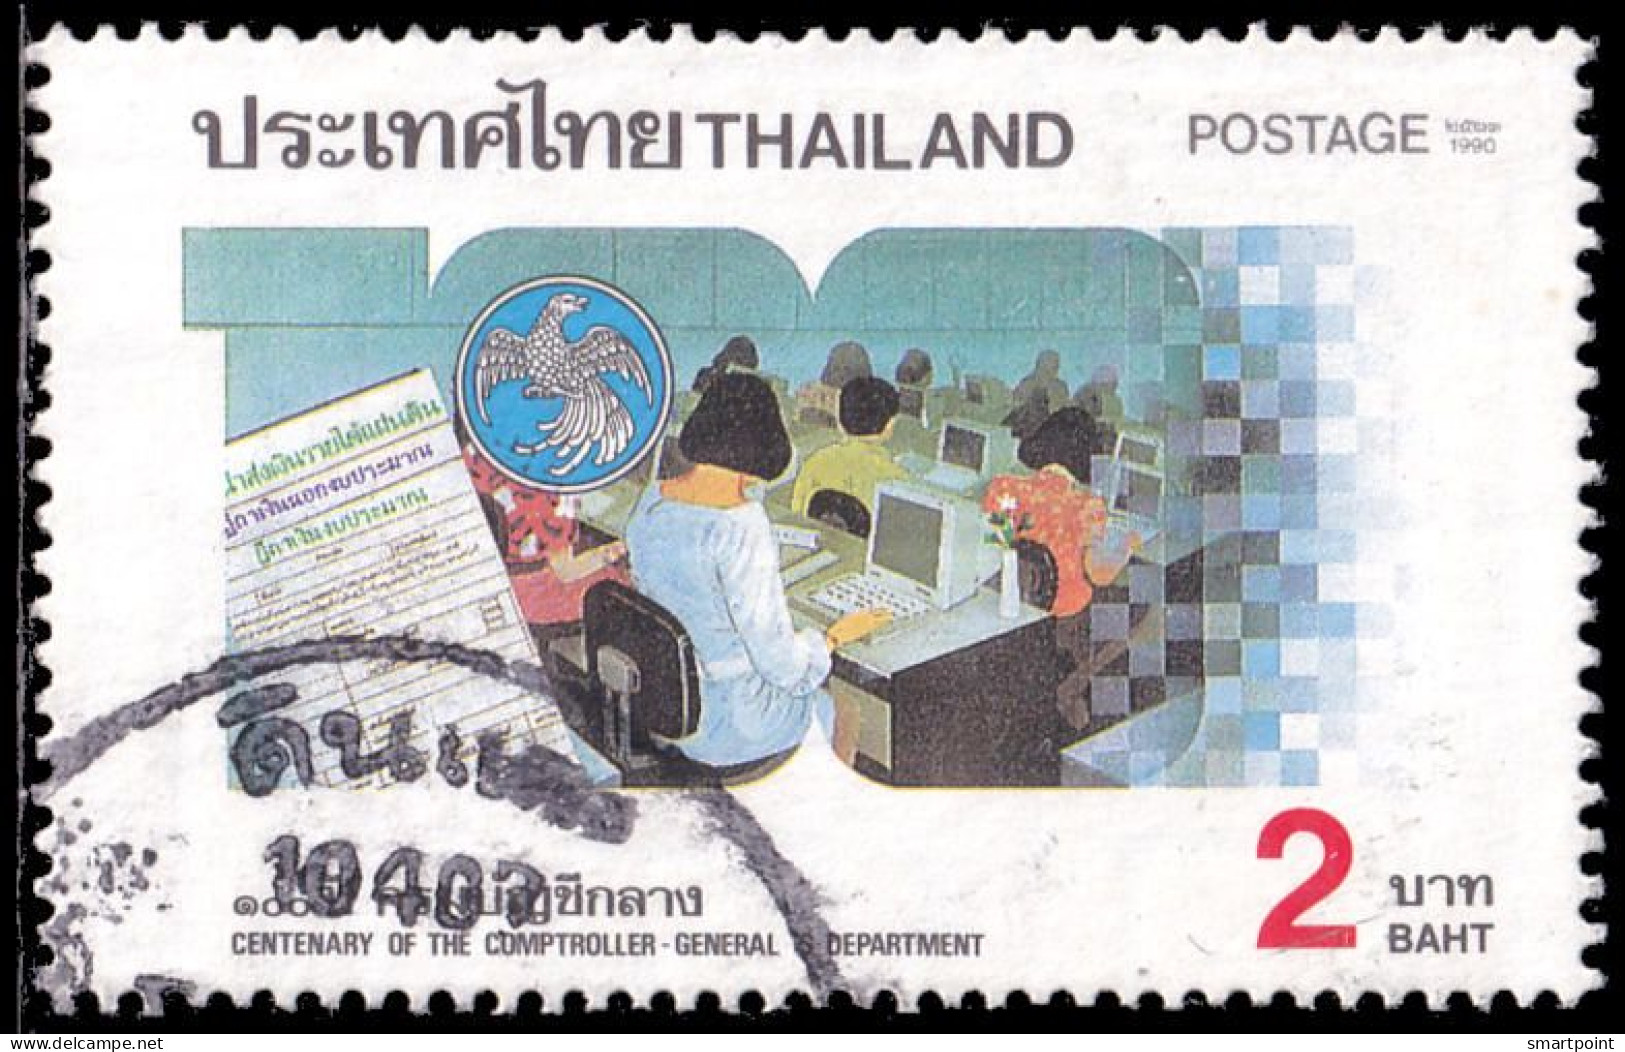 Thailand Stamp 1990 Centenary Of The Comptroller-General Department - Used - Thailand